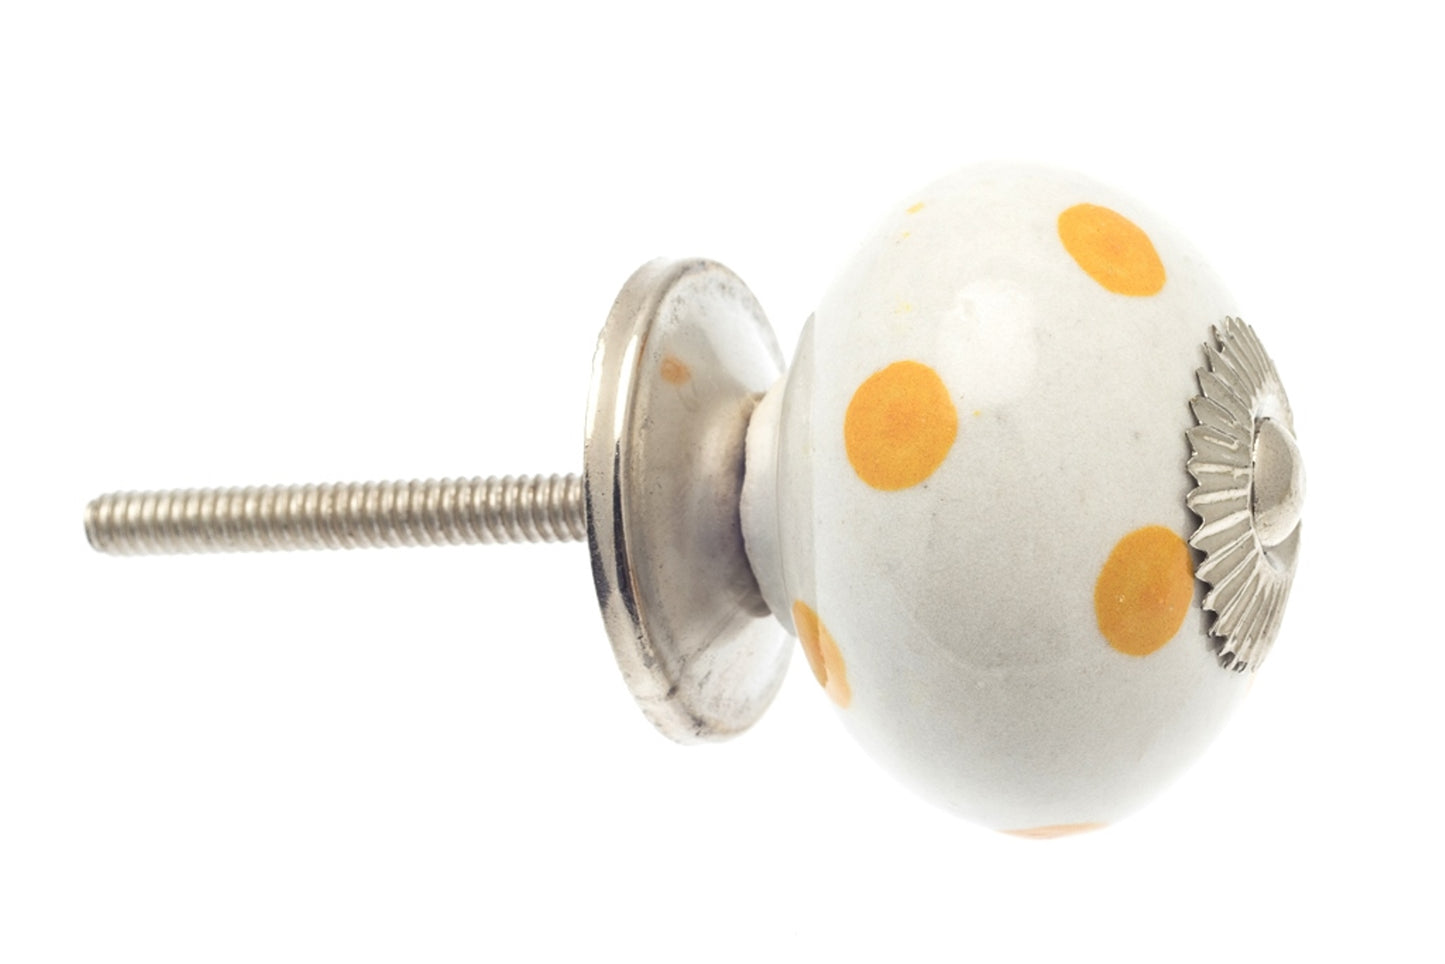 Ceramic Knob White with Yellow Spots / Dots